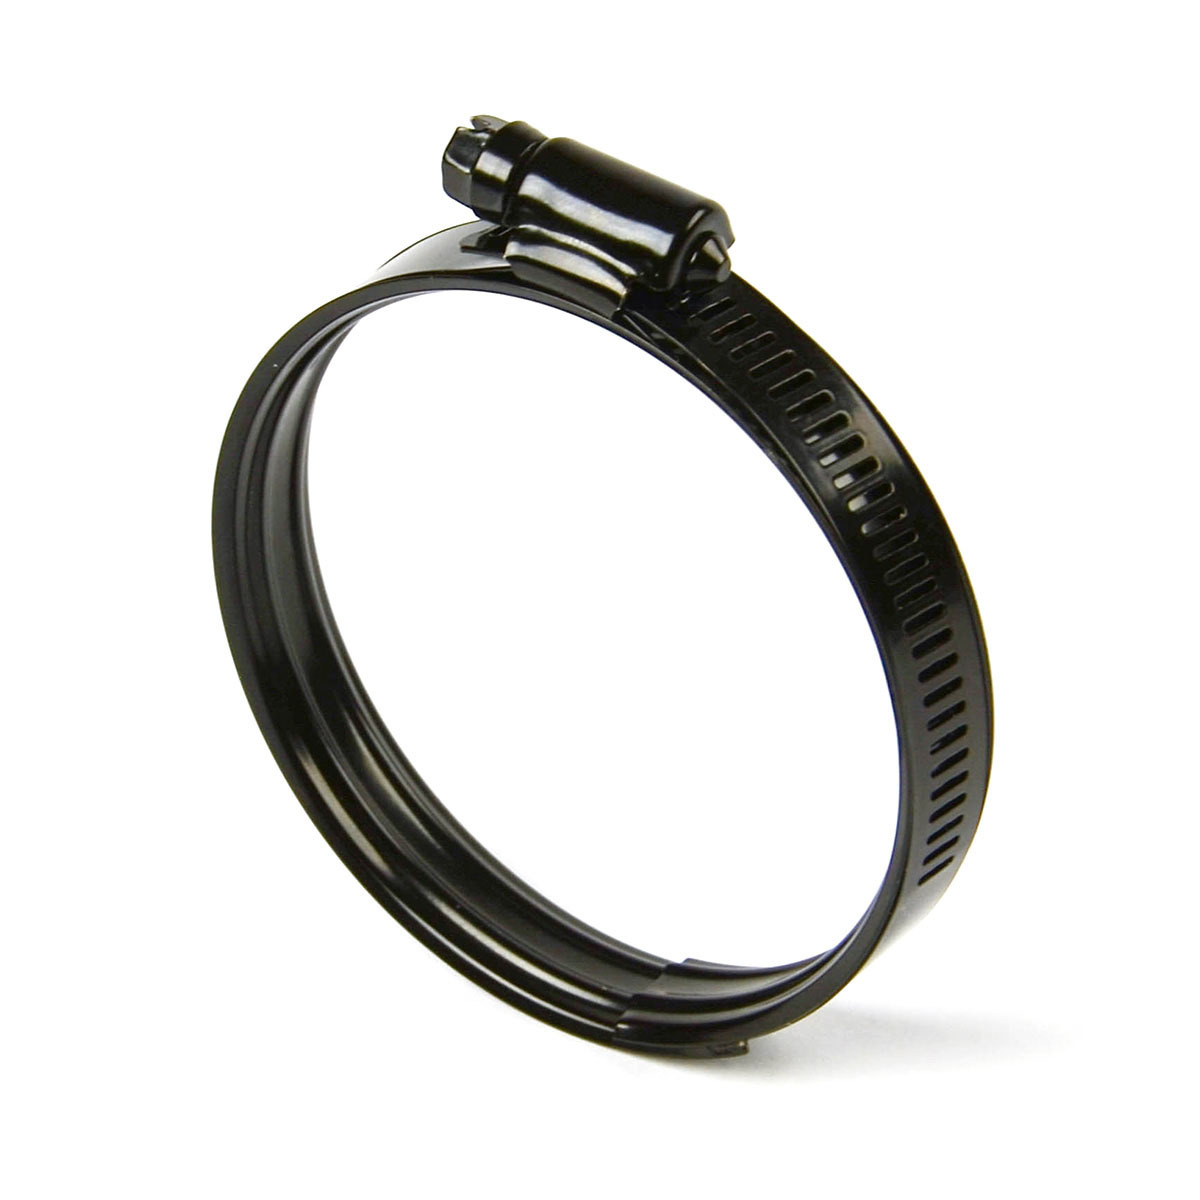 Hose Clamp Dual Bead Black Stainless Steel 39mm - 56mm